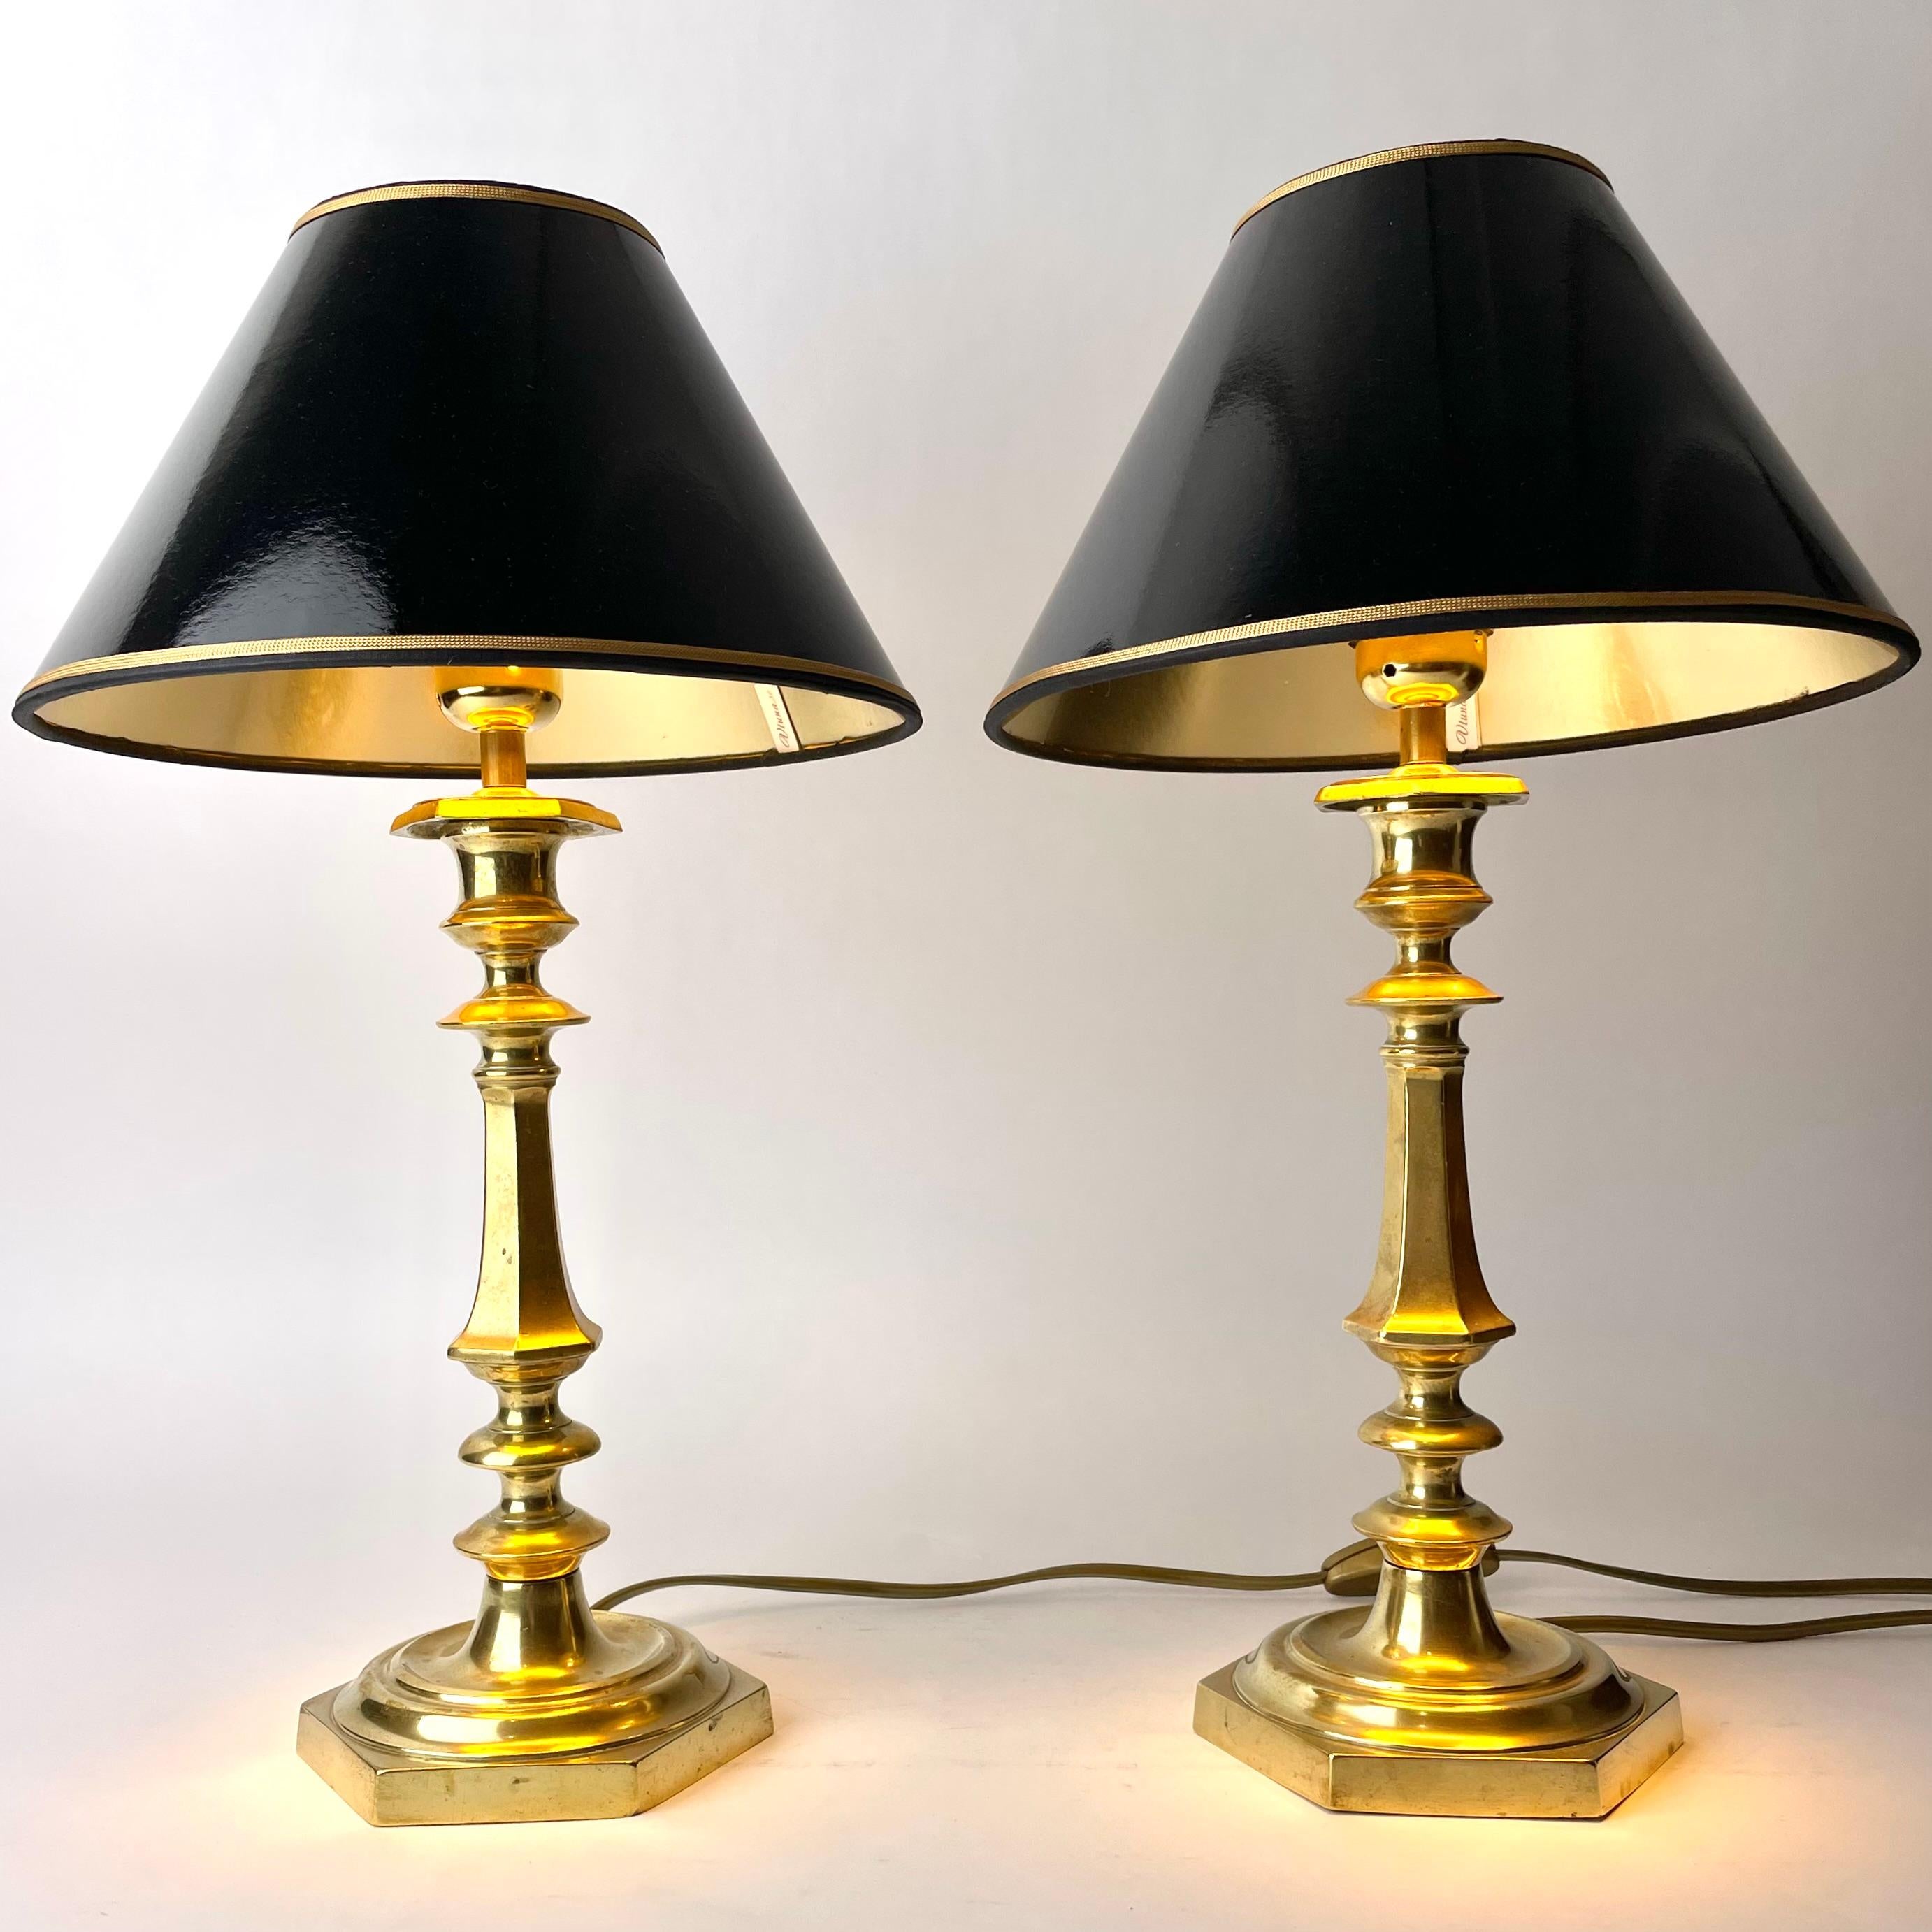 European Pair of hexagonal Bronze Table Lamps from Mid-19th Century For Sale